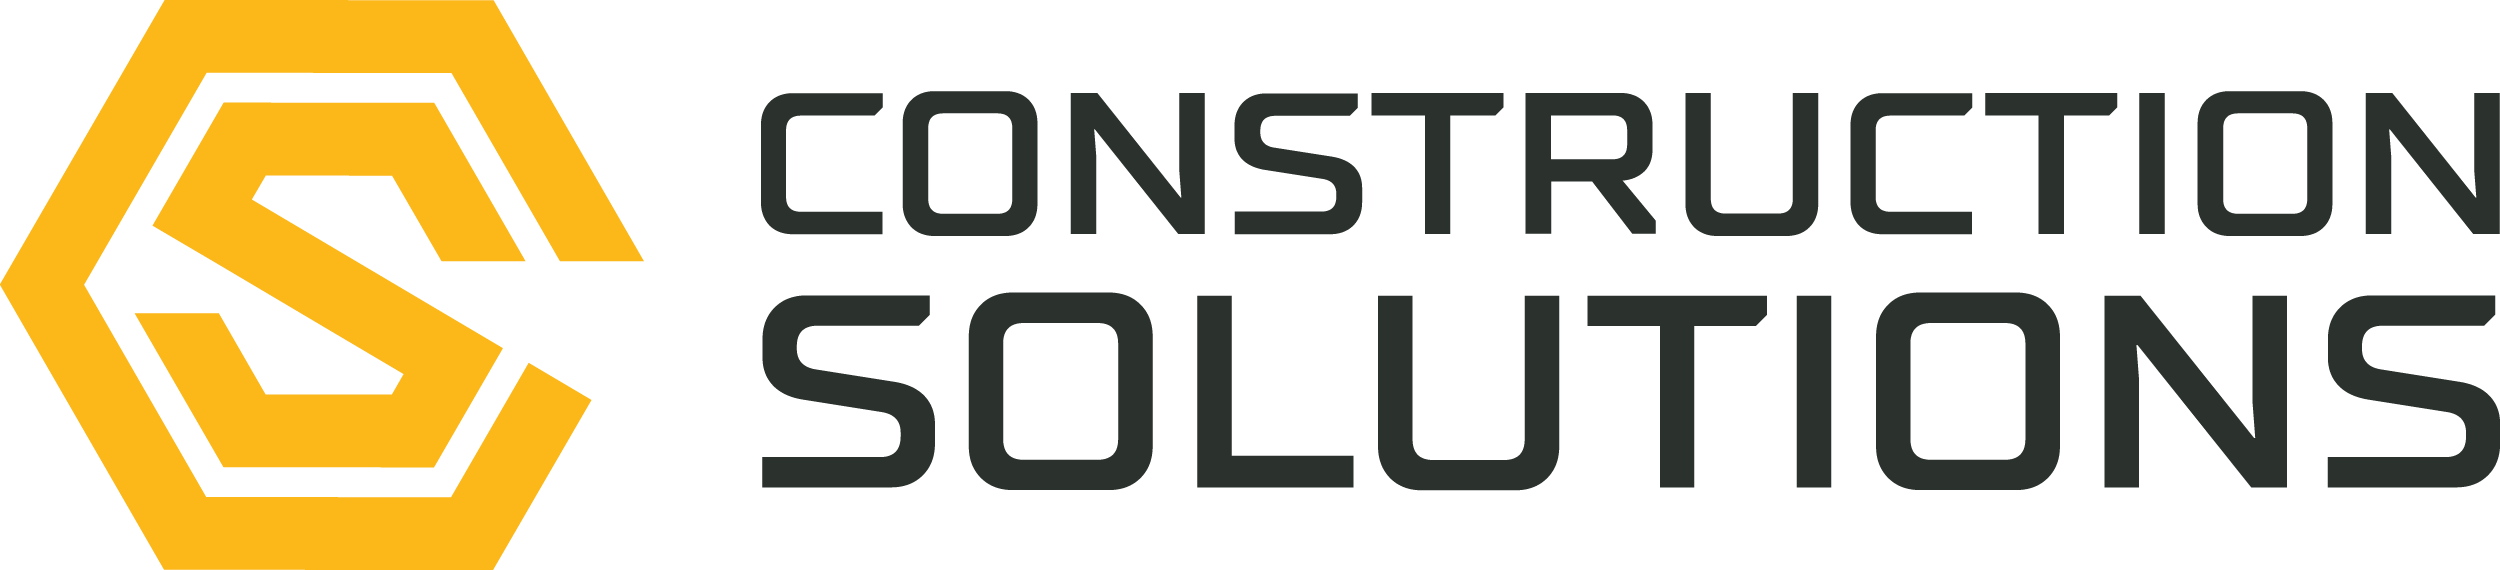 Construction Solutions - Directory Logo